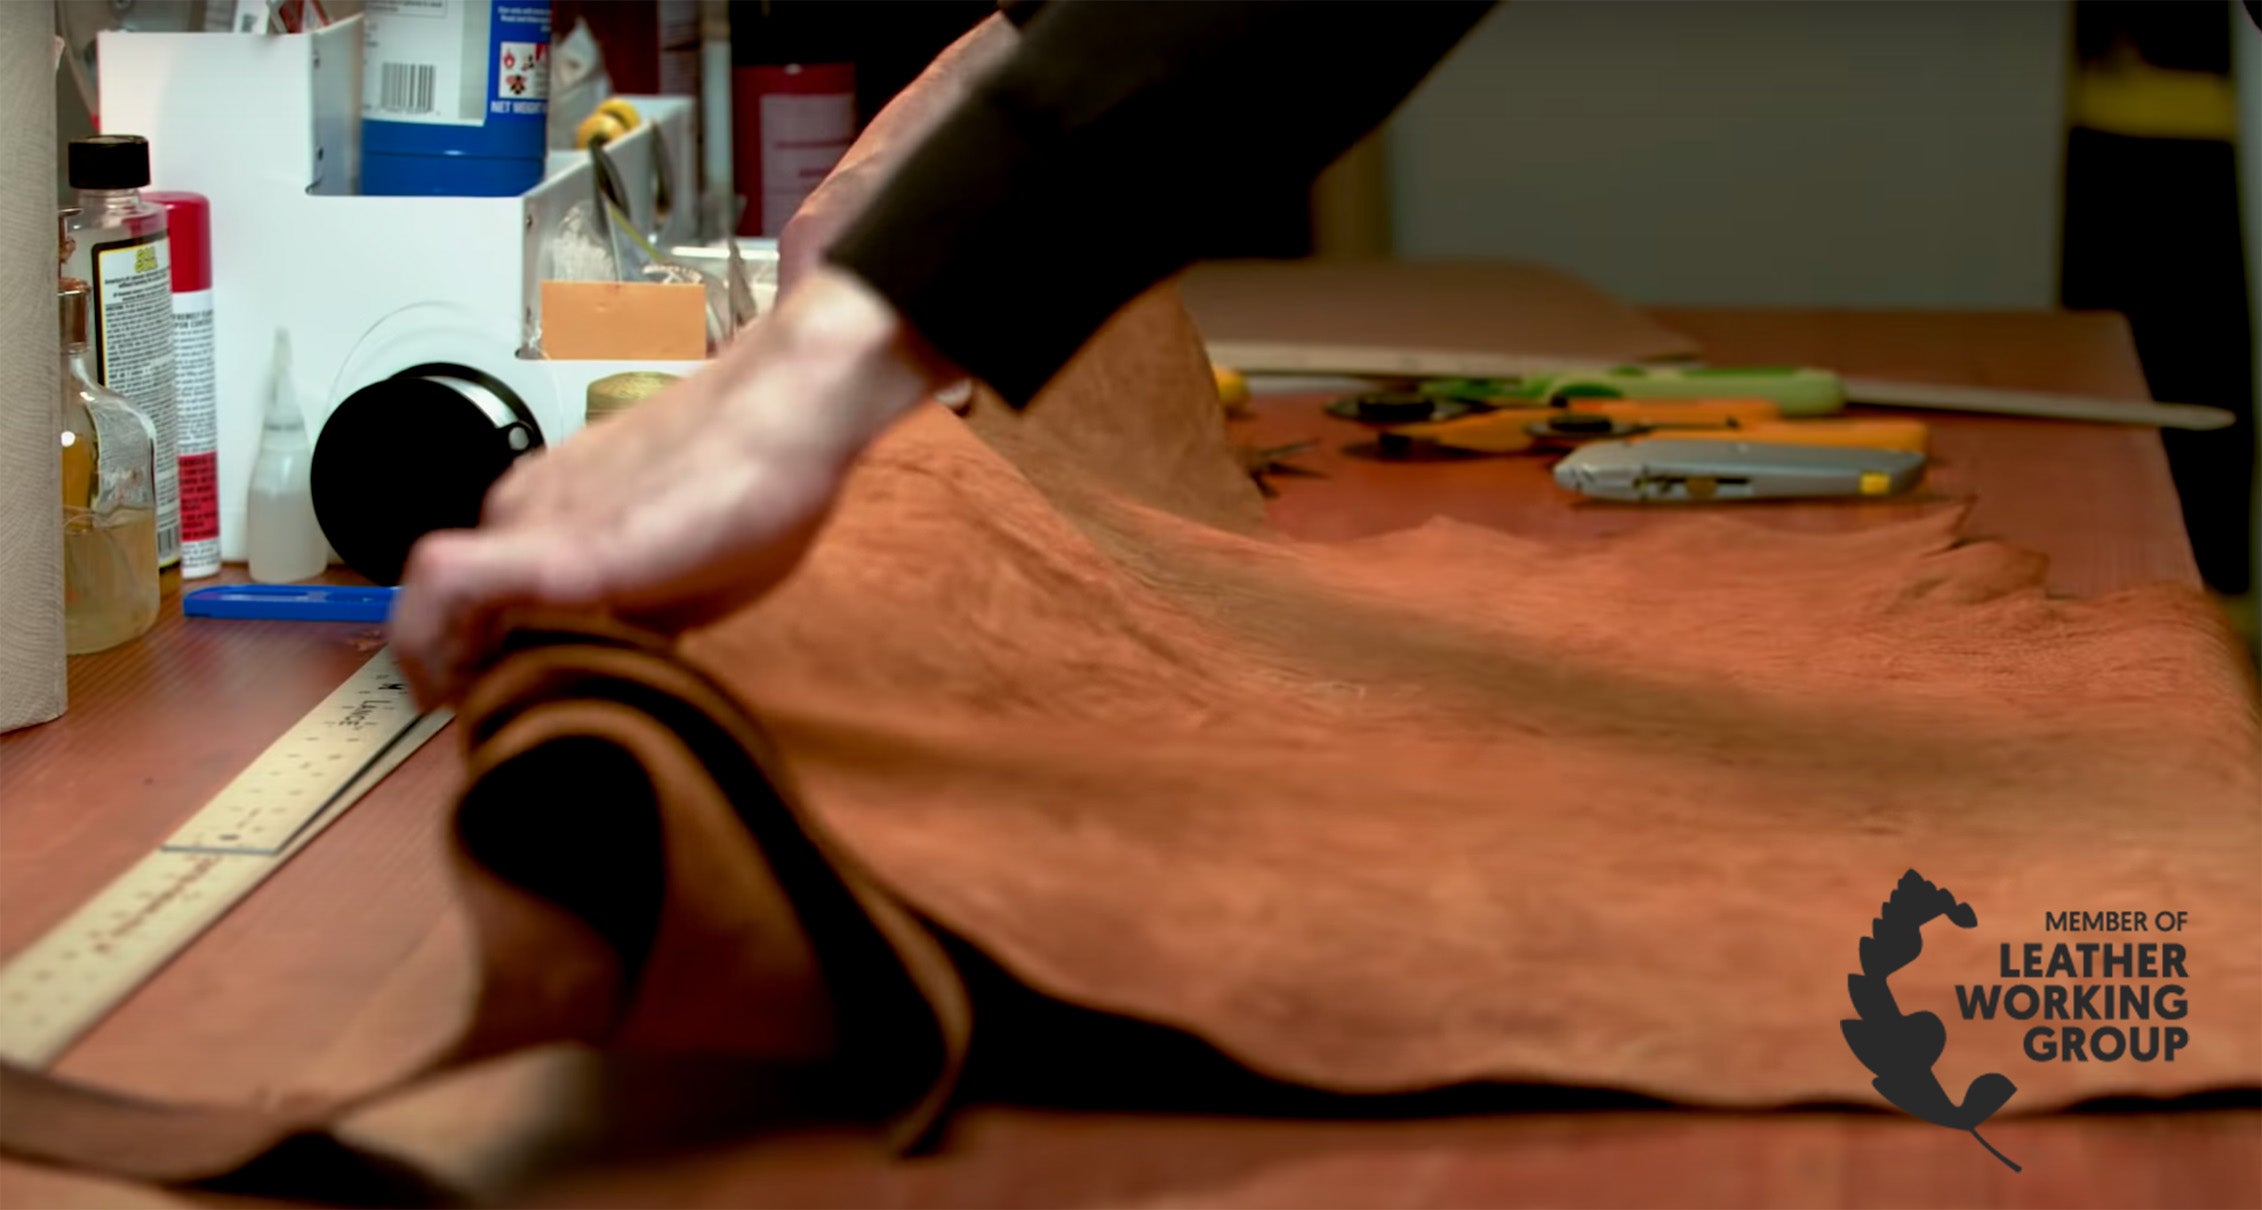 Working with leather from LWG-certified tanneries